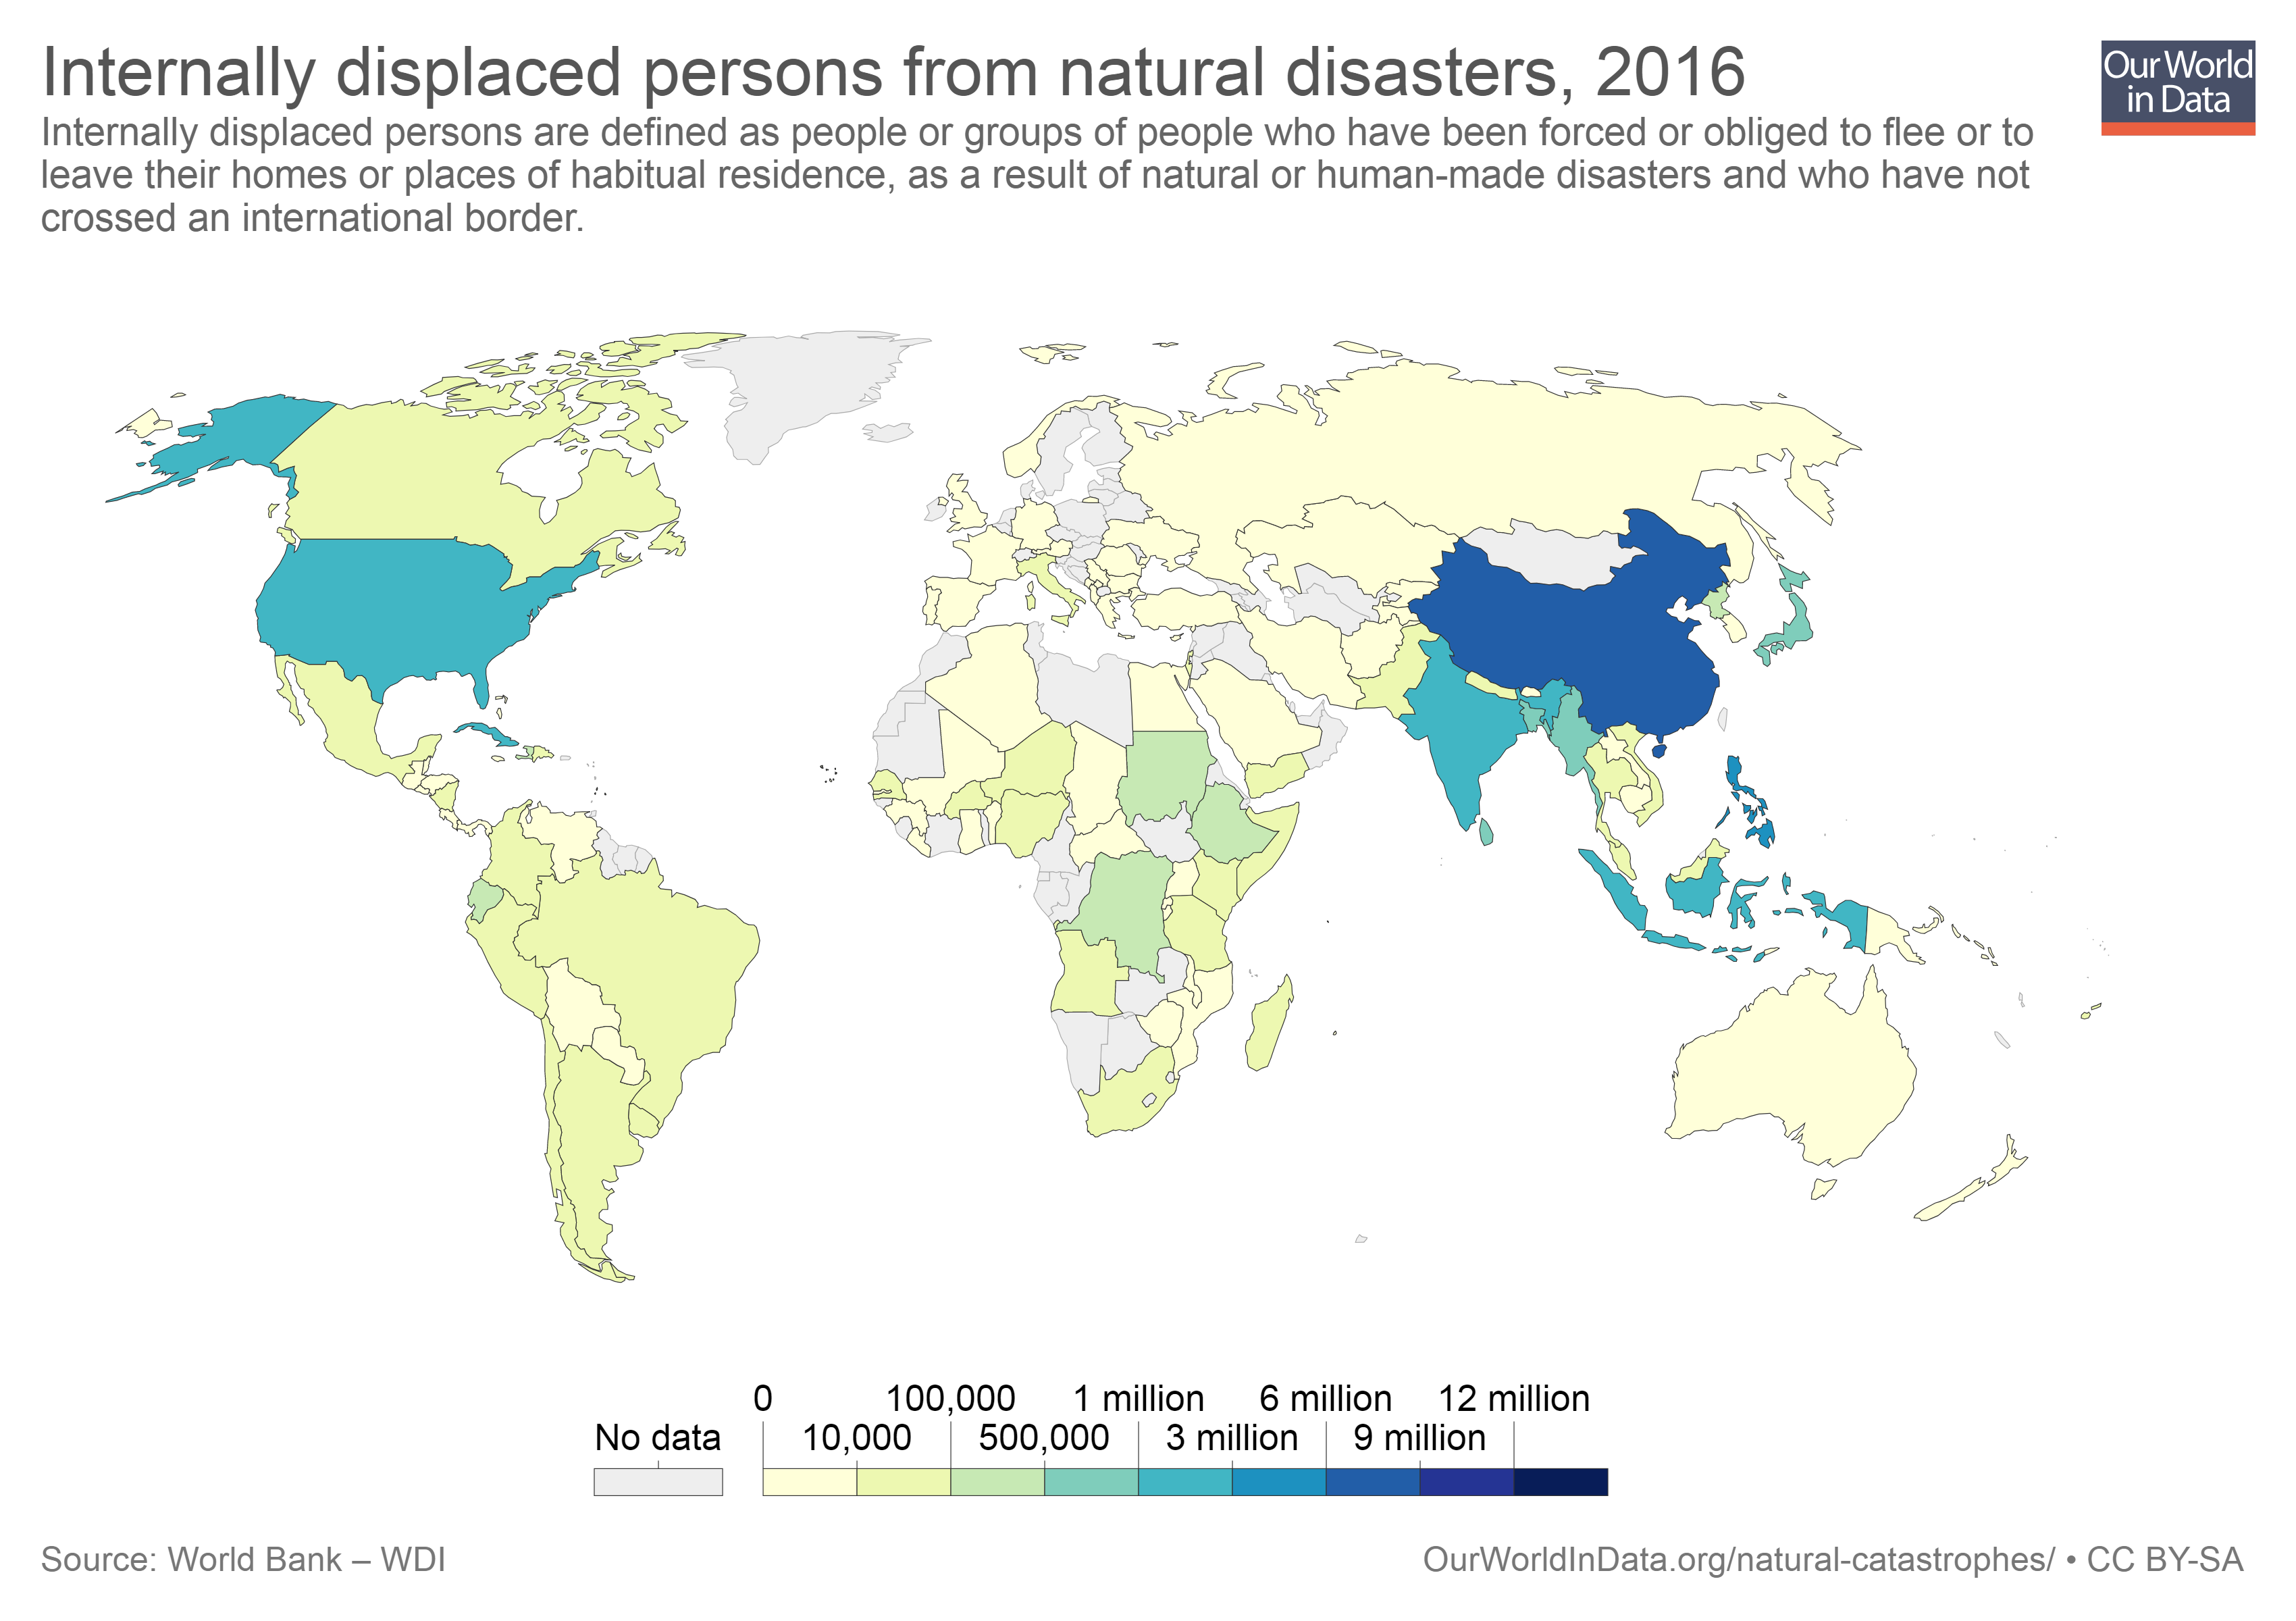 Map showing persons displaced by natural disasters in 2016